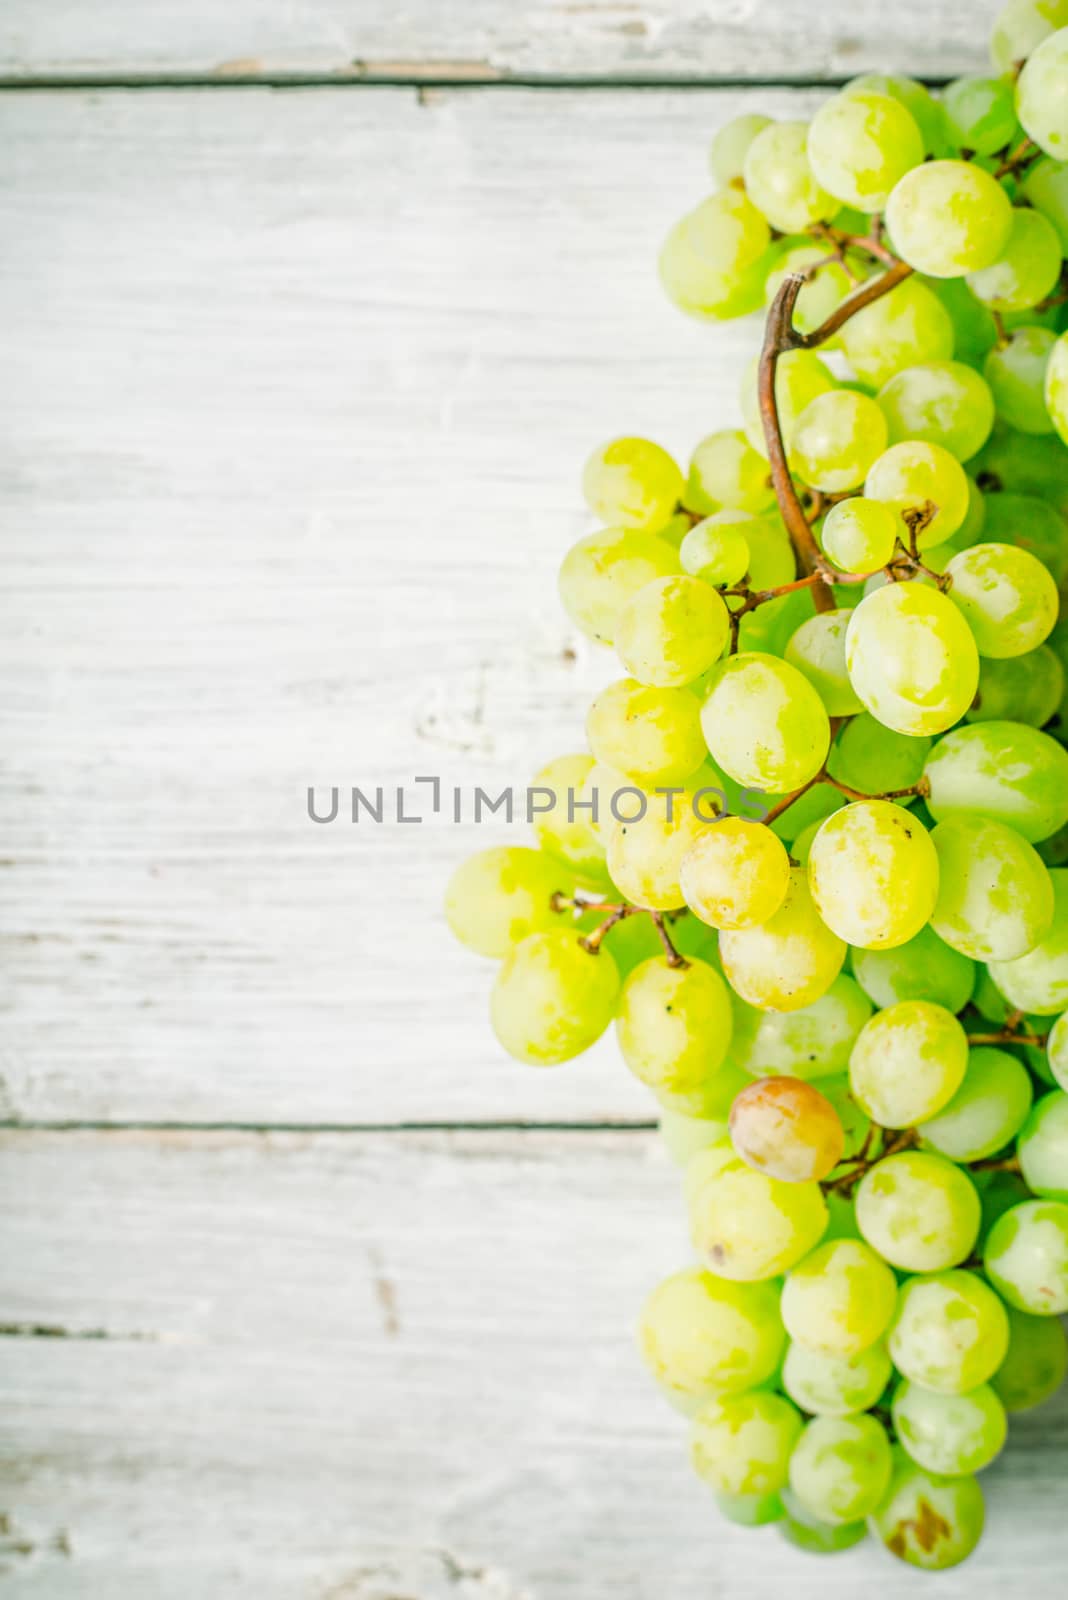 Grapes on the white wooden table